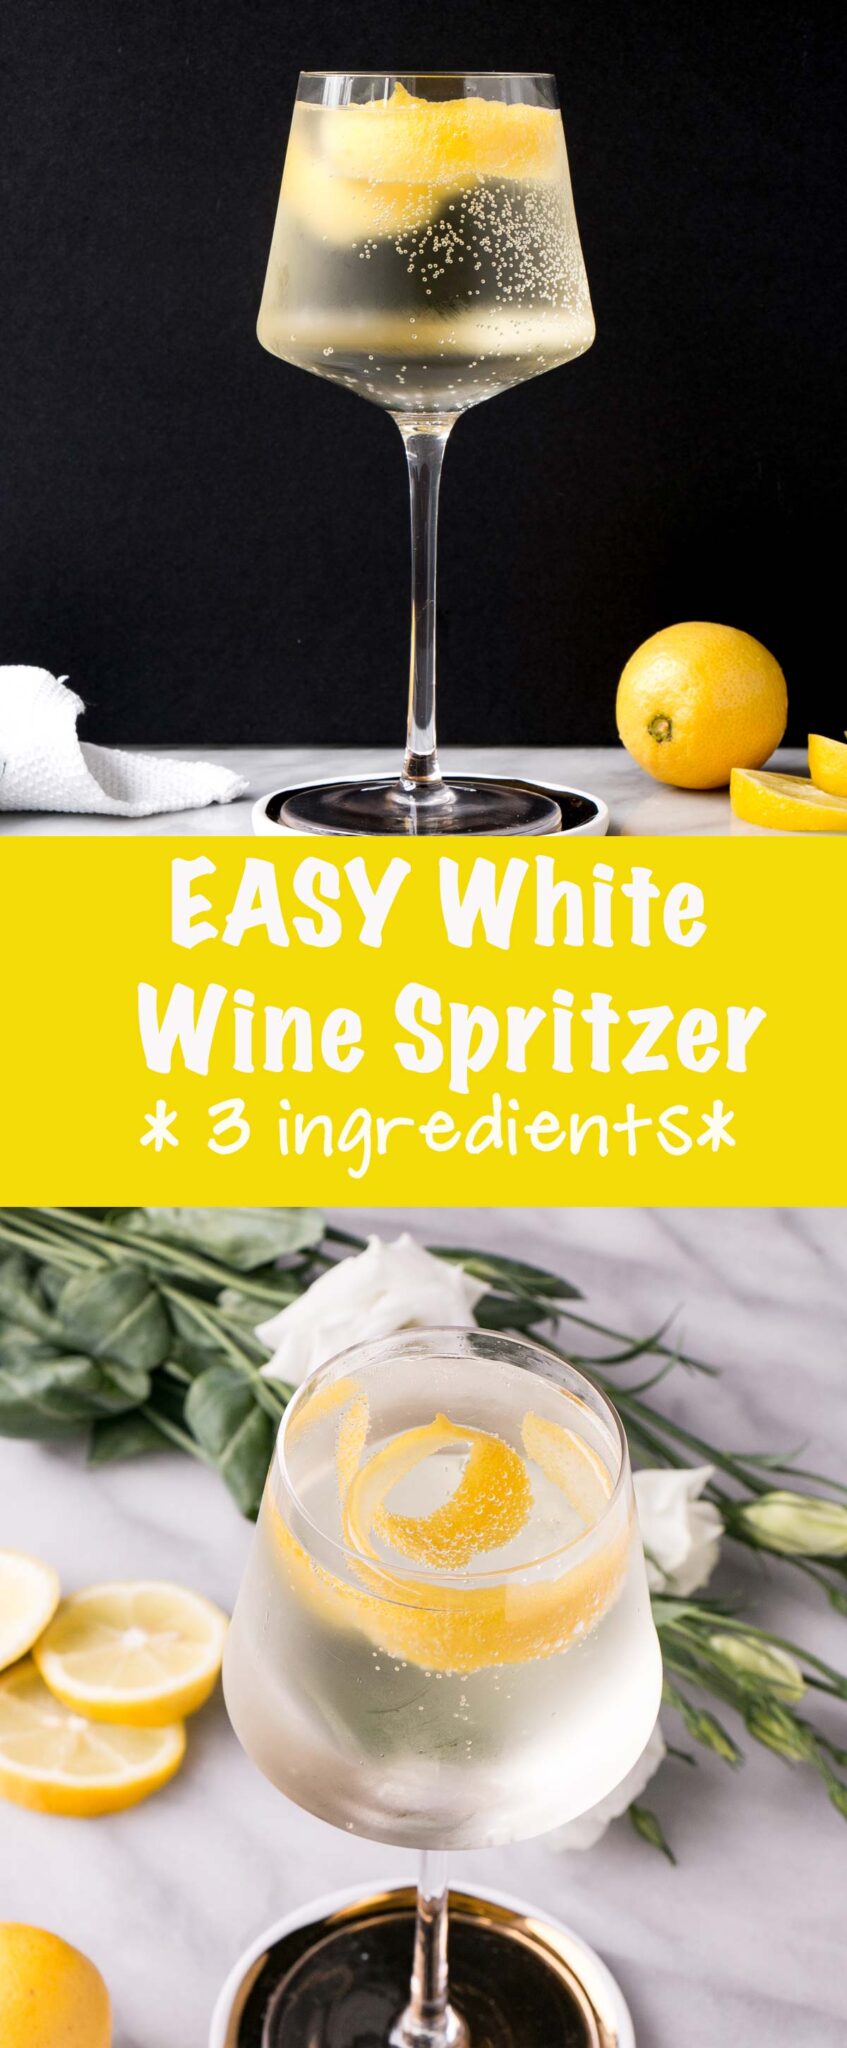 Refreshing and Easy White Wine Spritzer! 3 simple ingredients make this cocktail a delicious afternoon or cocktail party sipper.  via @mykitchenlove